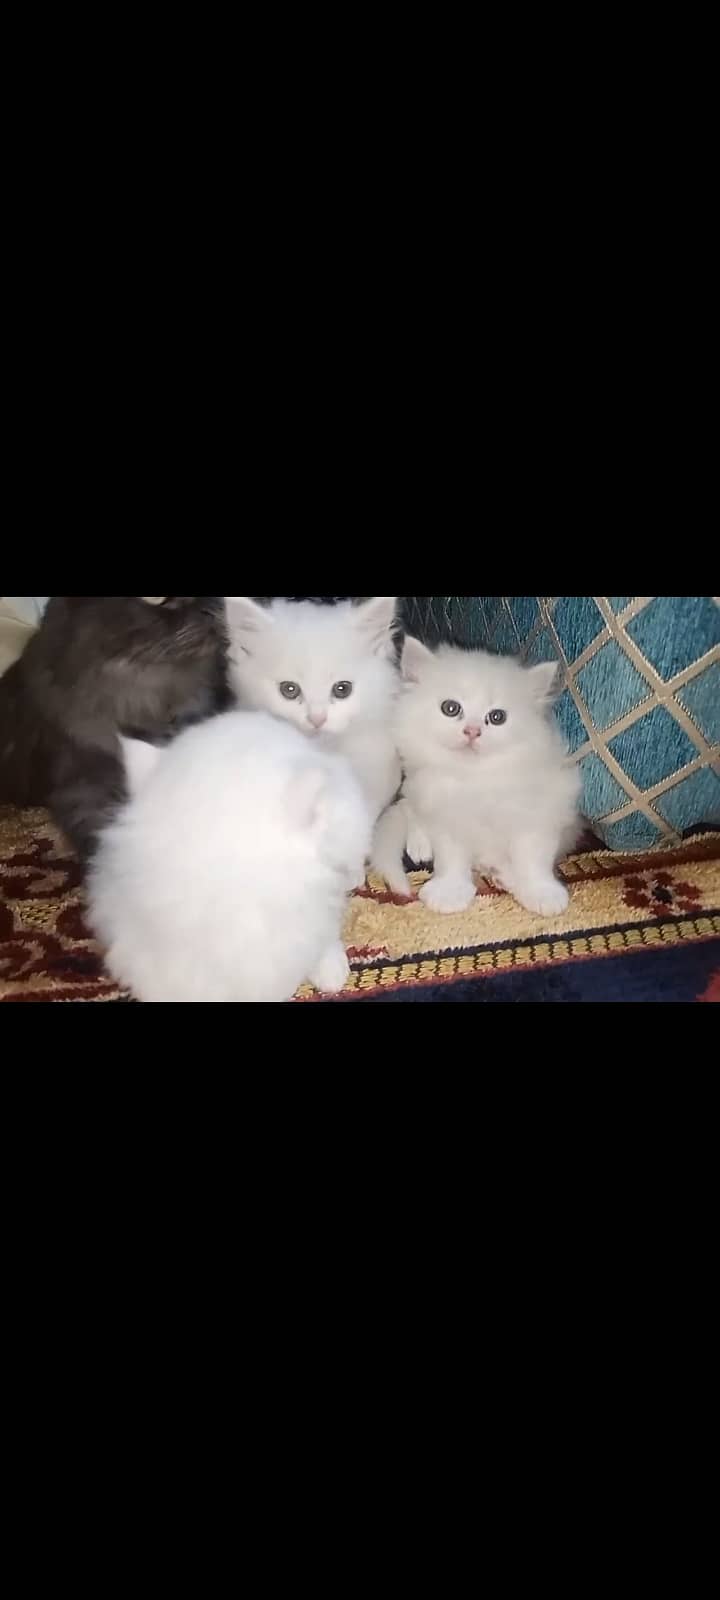 Tripple coated baby doll face 2 kittens for sale. 1